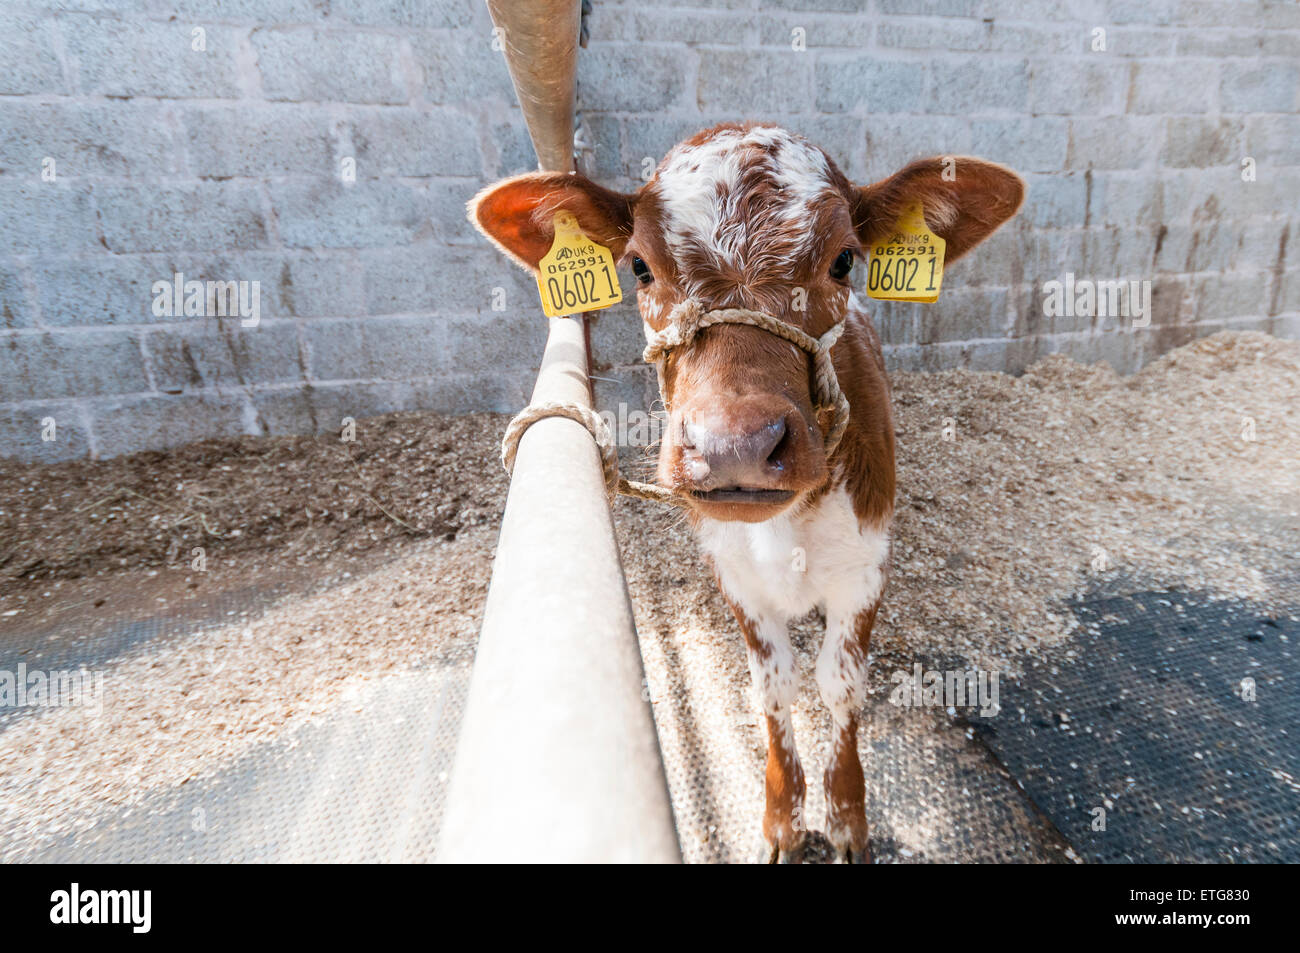 Young calf tied to a gate Stock Photo